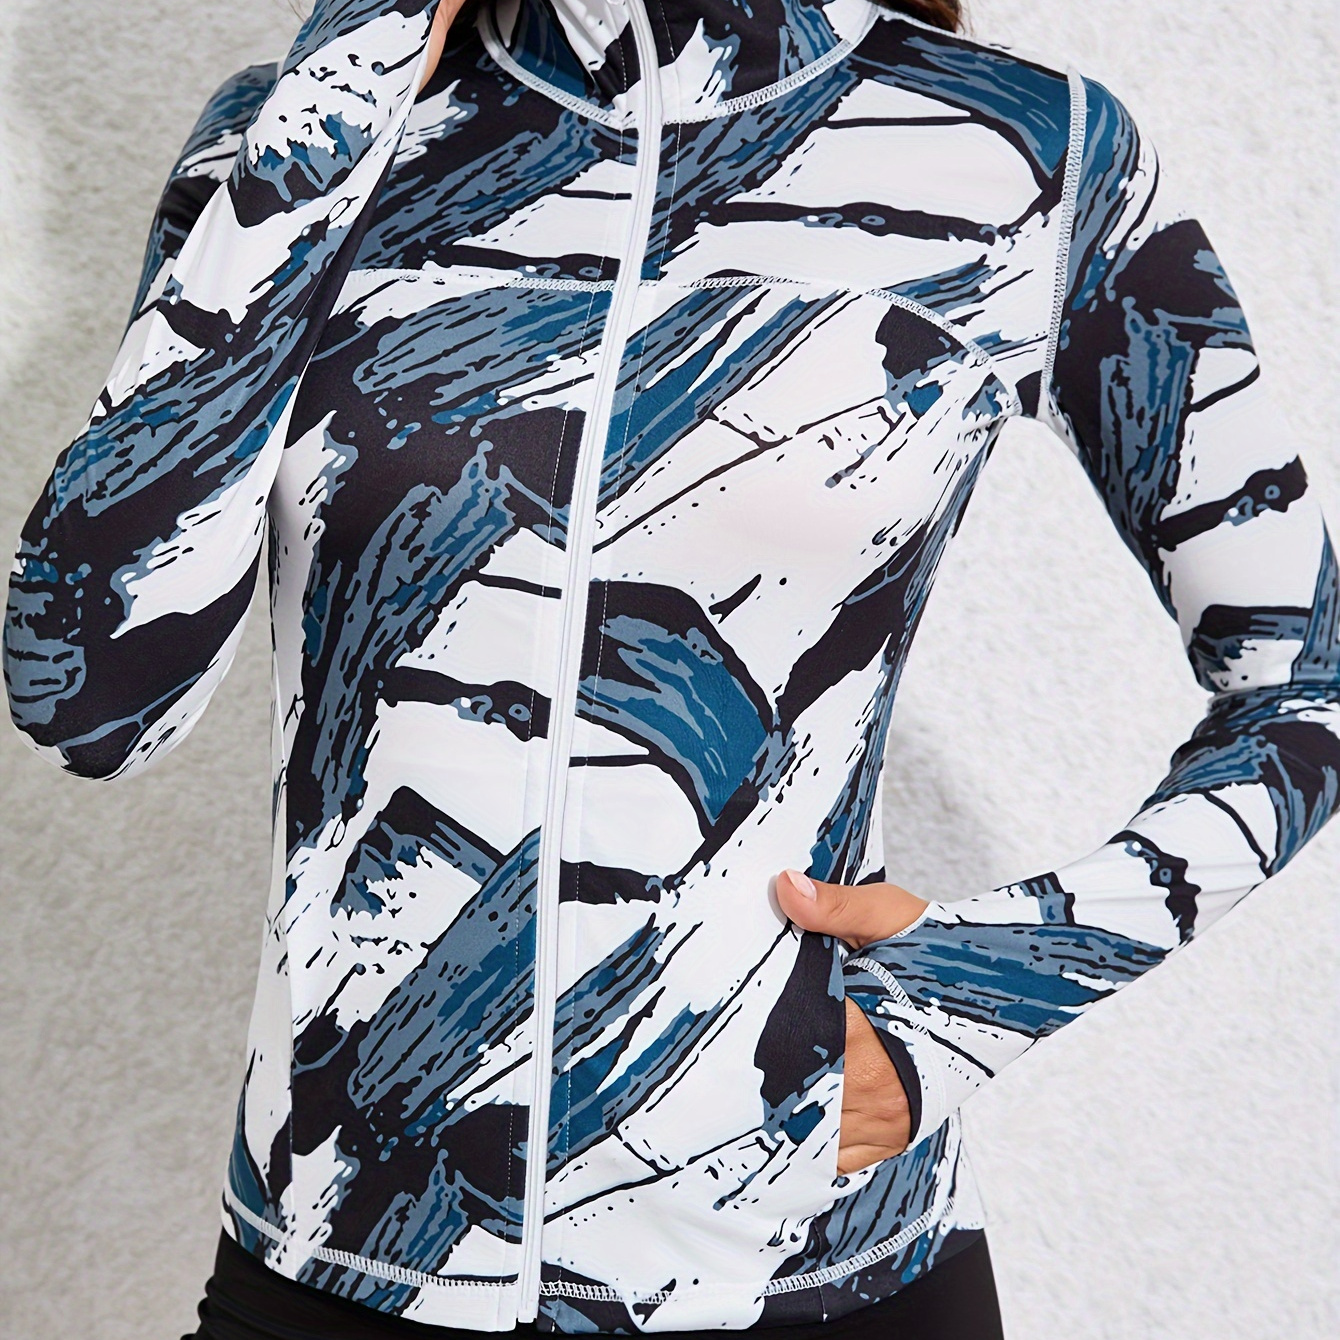 

Color Block Print Yoga Jacket With Thumb Hole, Full Zipper Sports Running Jacket For Women, Women's Activewear